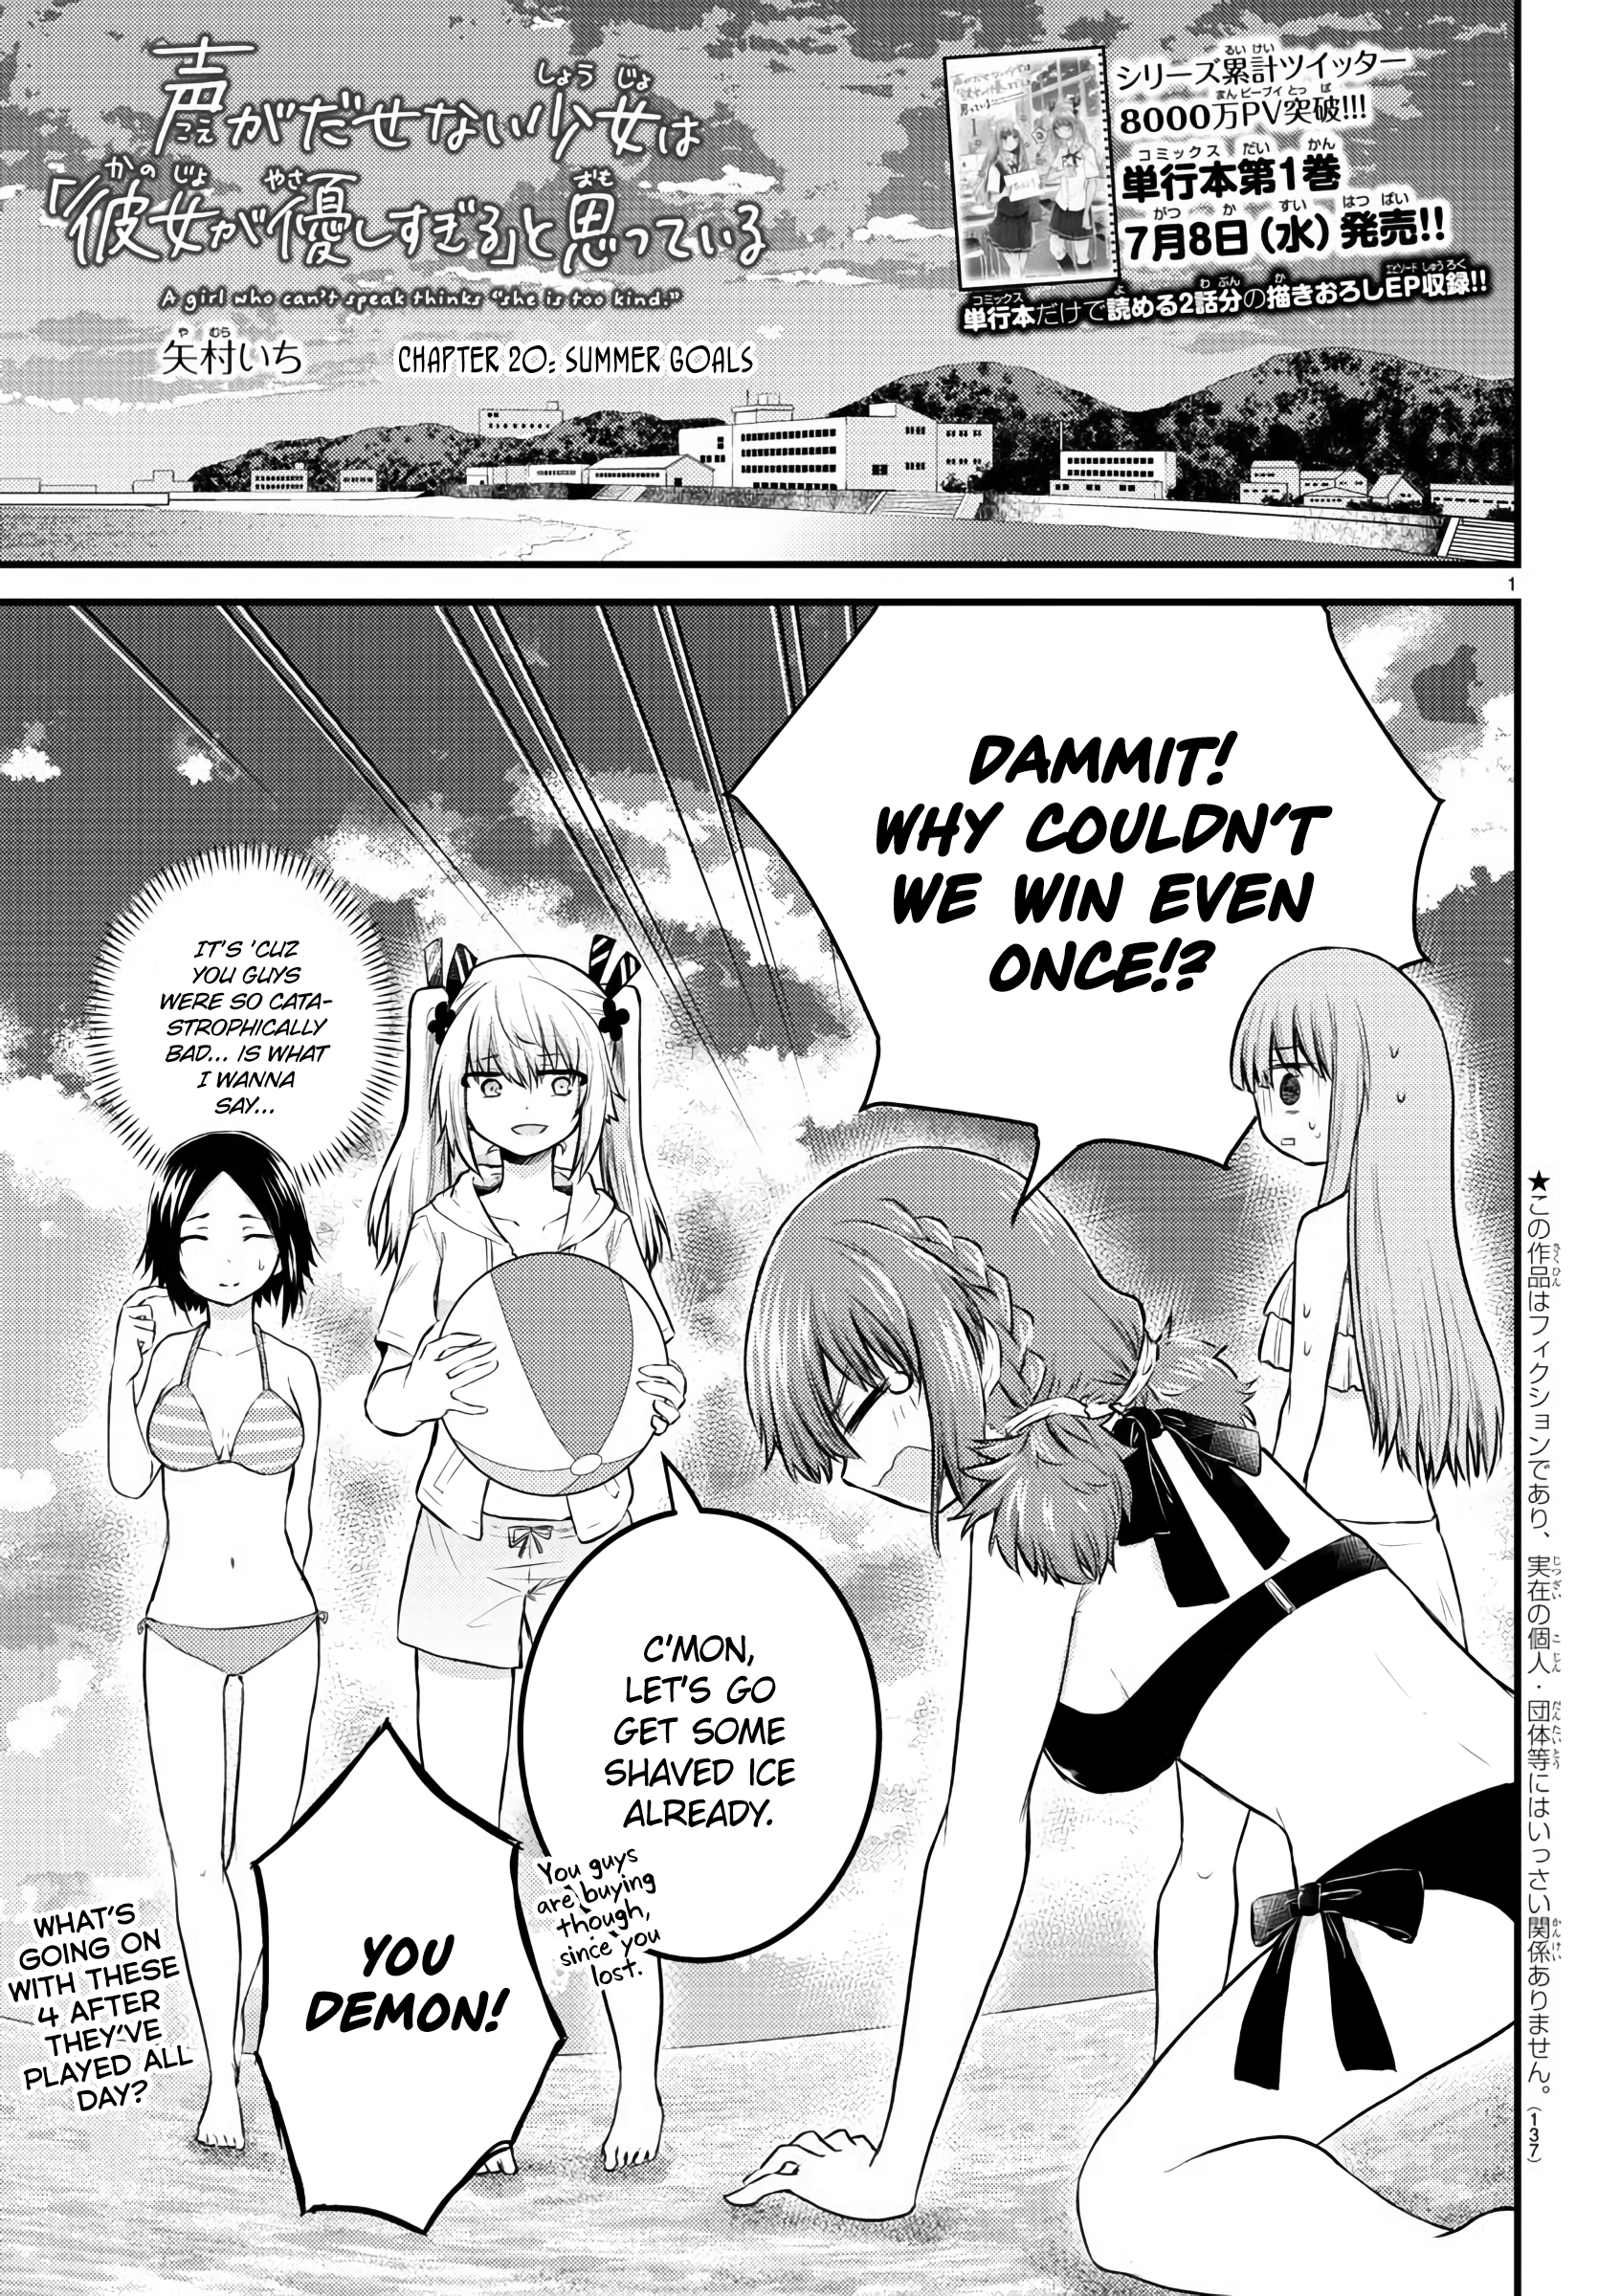 The Mute Girl And Her New Friend Vol.2 Chapter 20